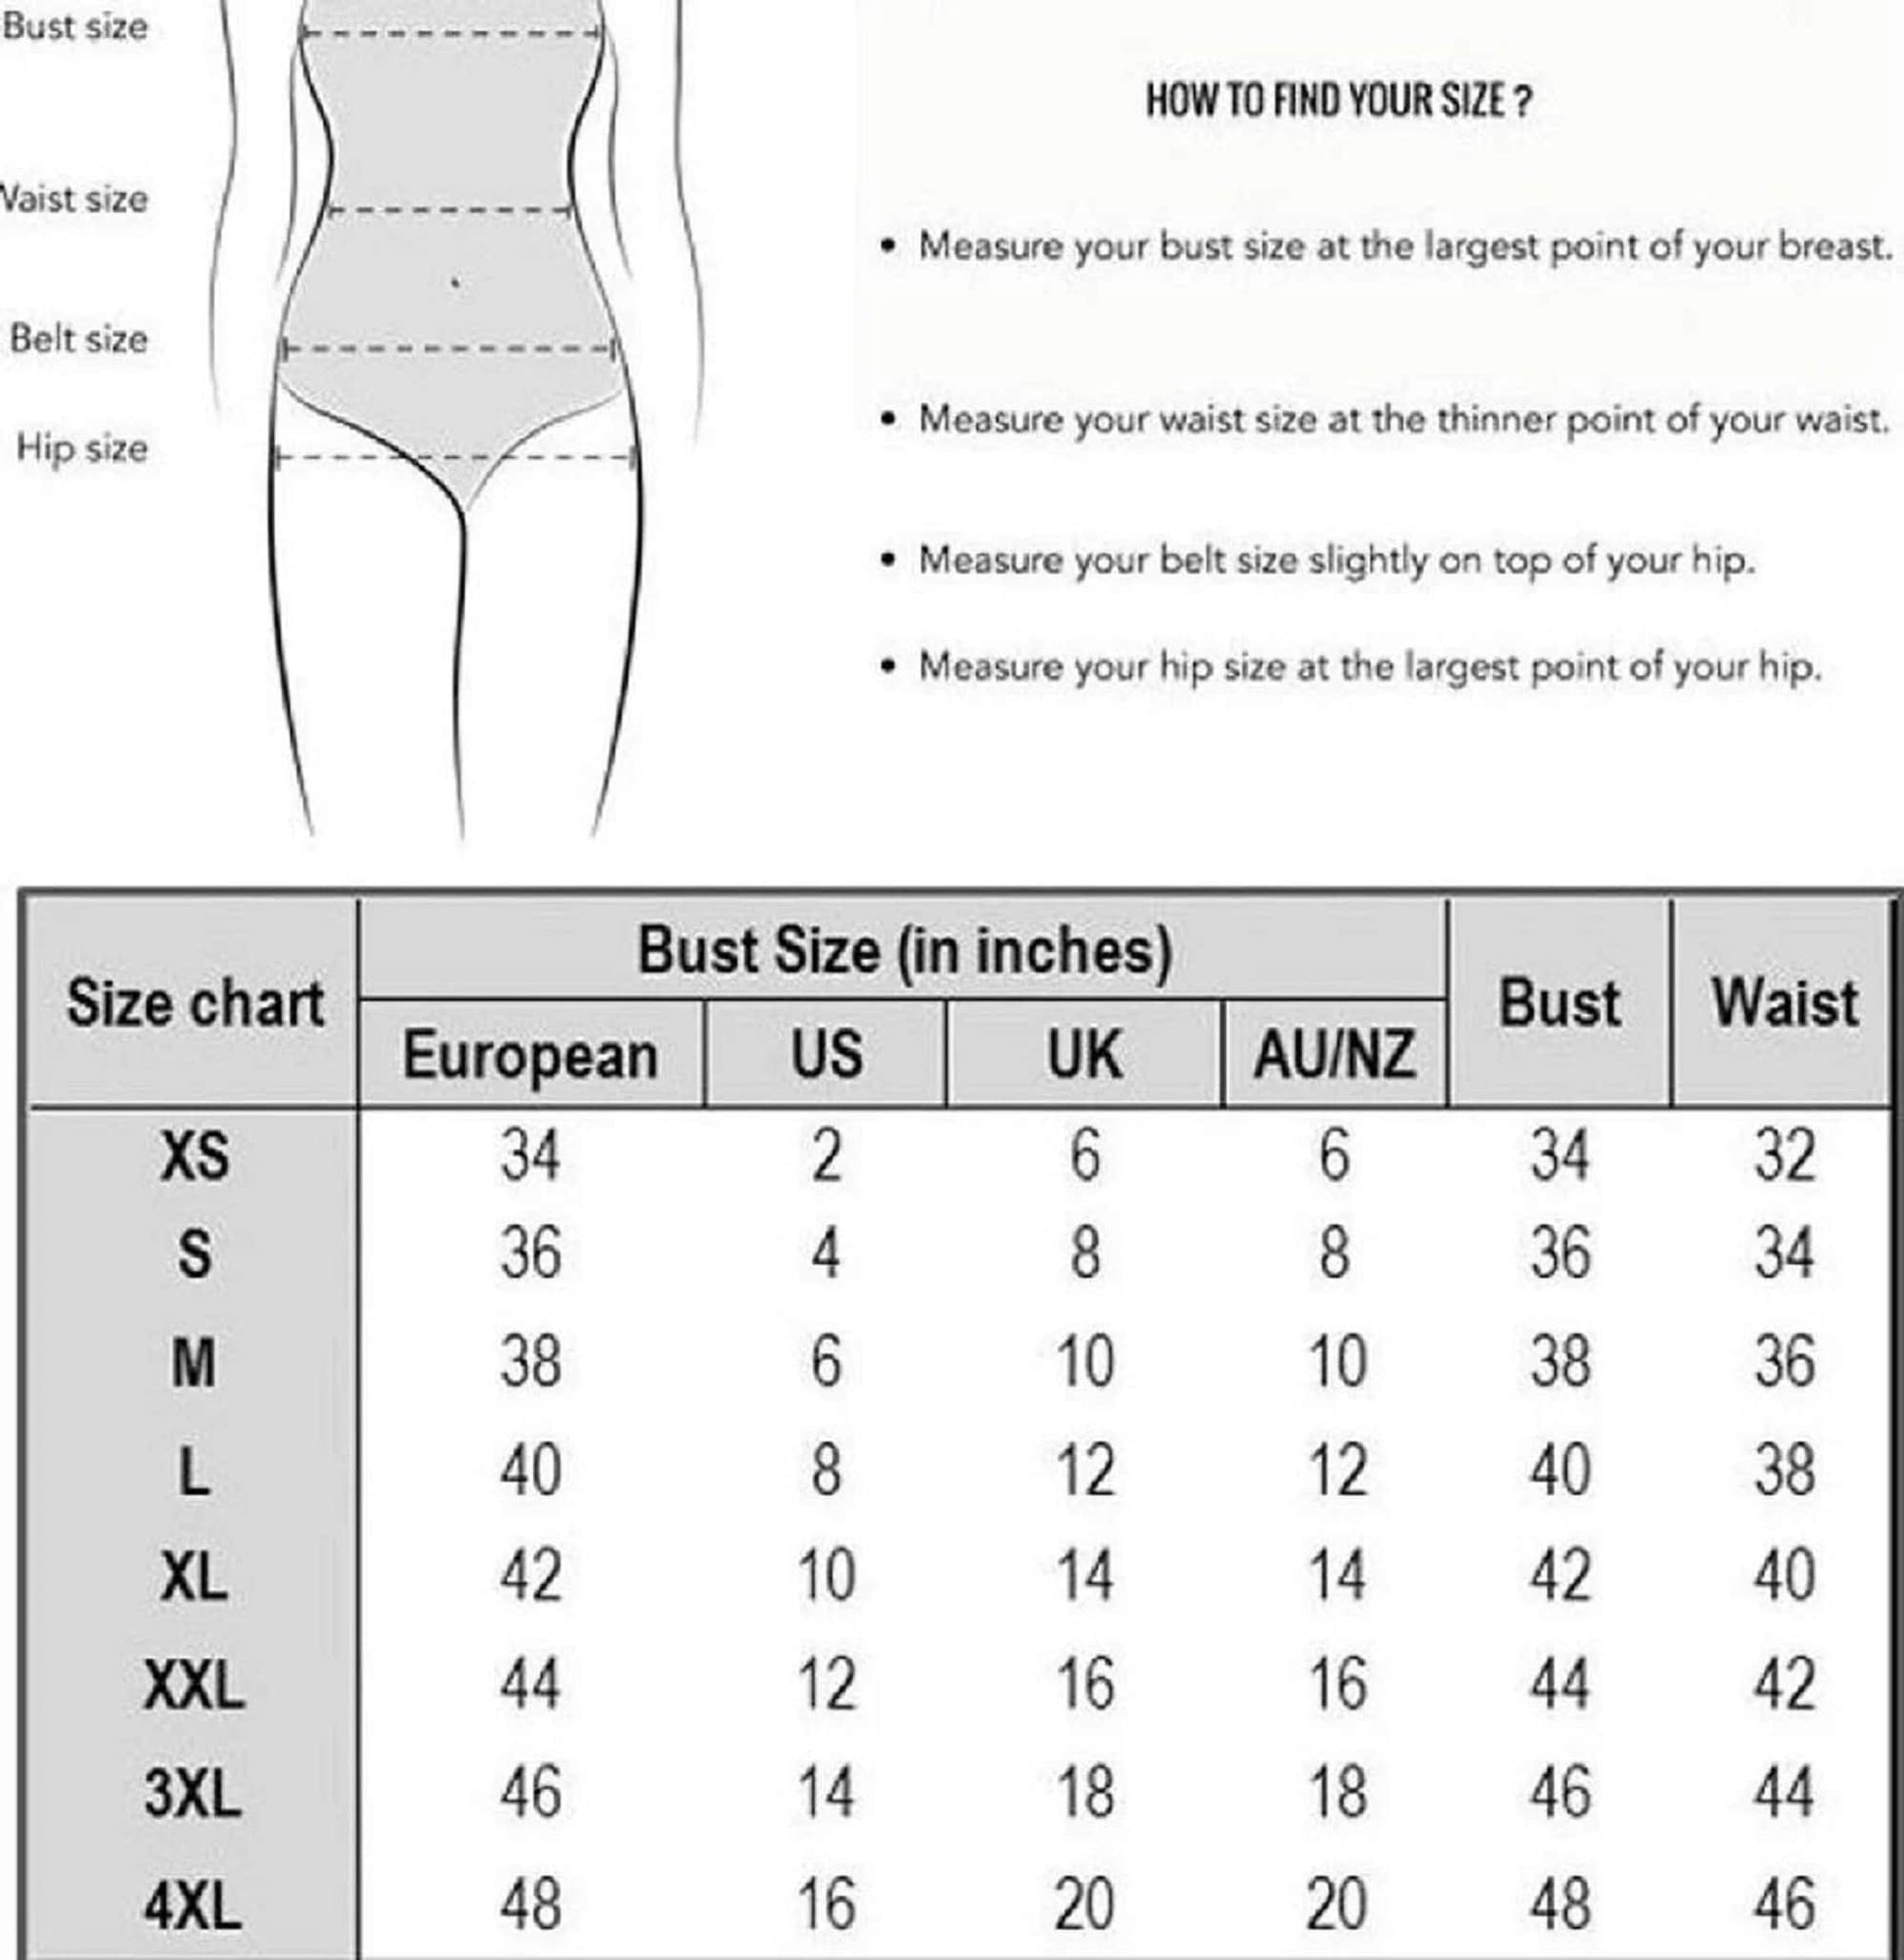 How To Find Your Bust Size